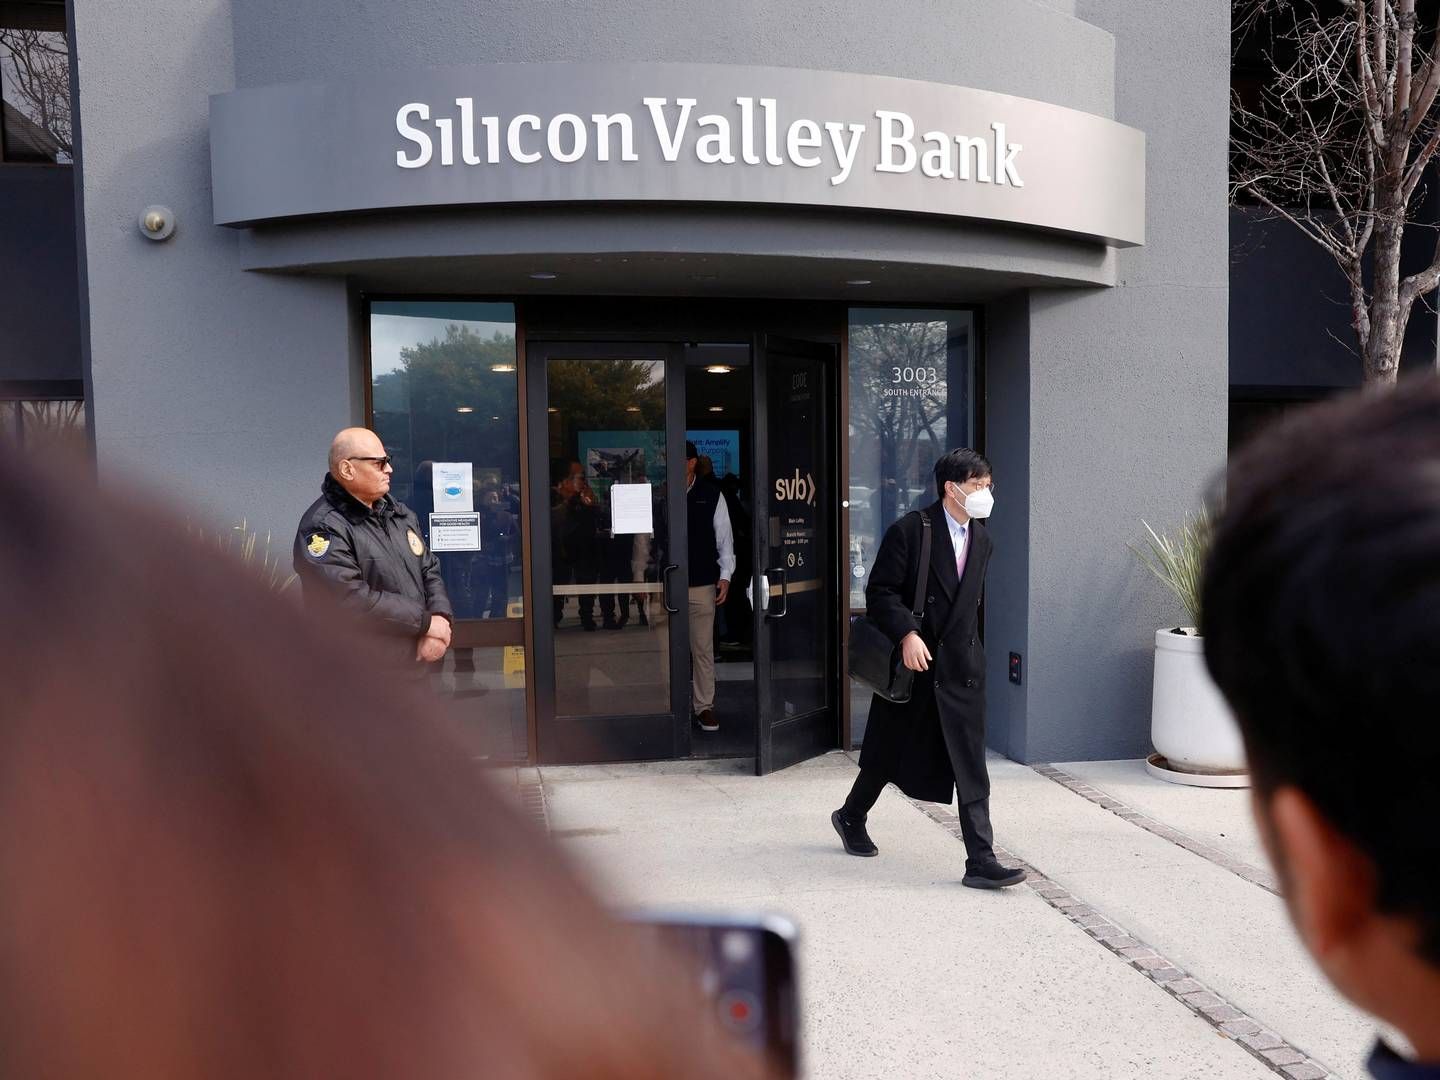 Silicon Valley Bank kollapsede i sidste uge. | Foto: Brittany Hosea-Small/Reuters/Ritzau Scanpix